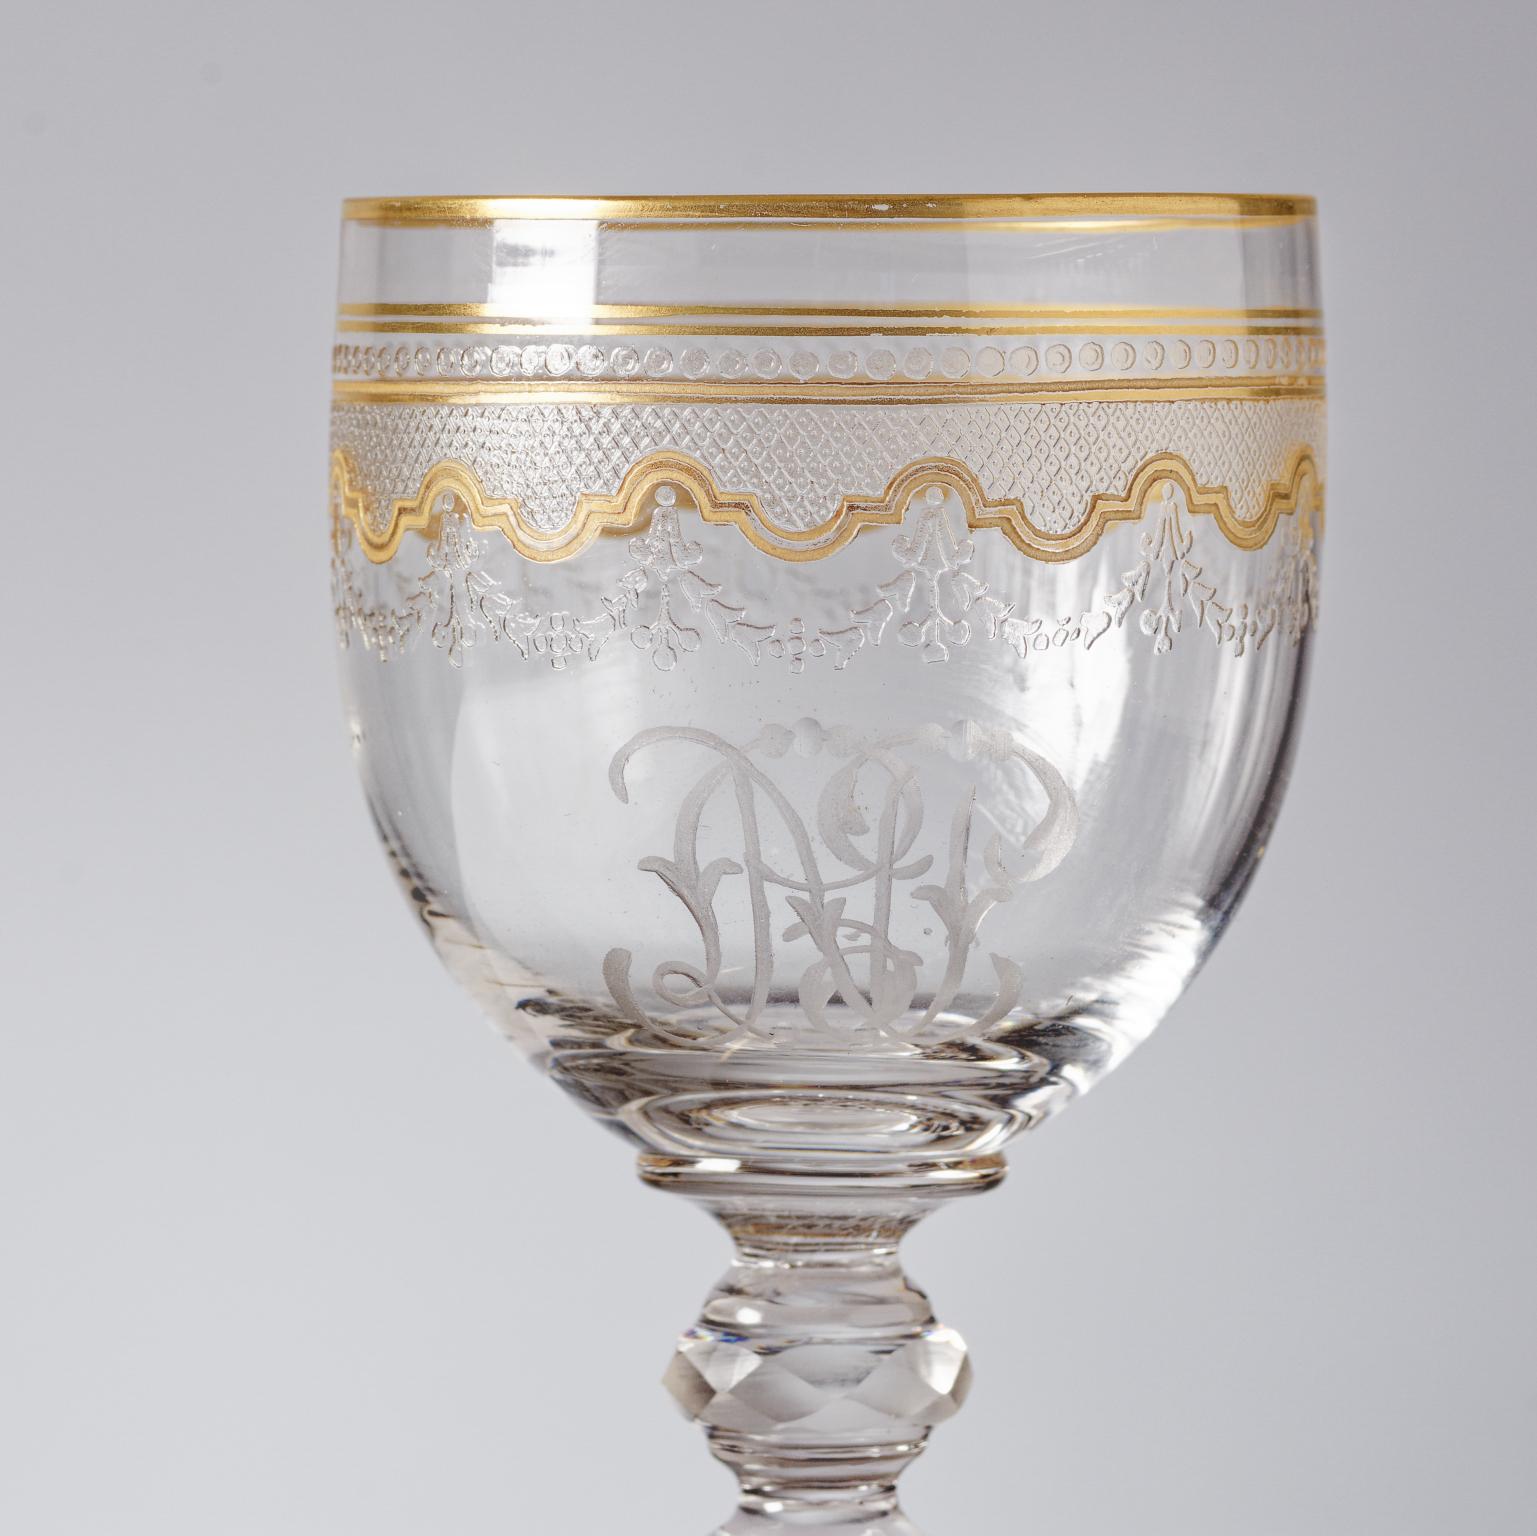 An elegant set of wine or liqueur glasses by the re known cristallerie firm of Saint Louis France. This pattern features a nice cut knob stem and shaped gilt design surround on the top portion of the rim enhanced with cut fan diamonds and floral